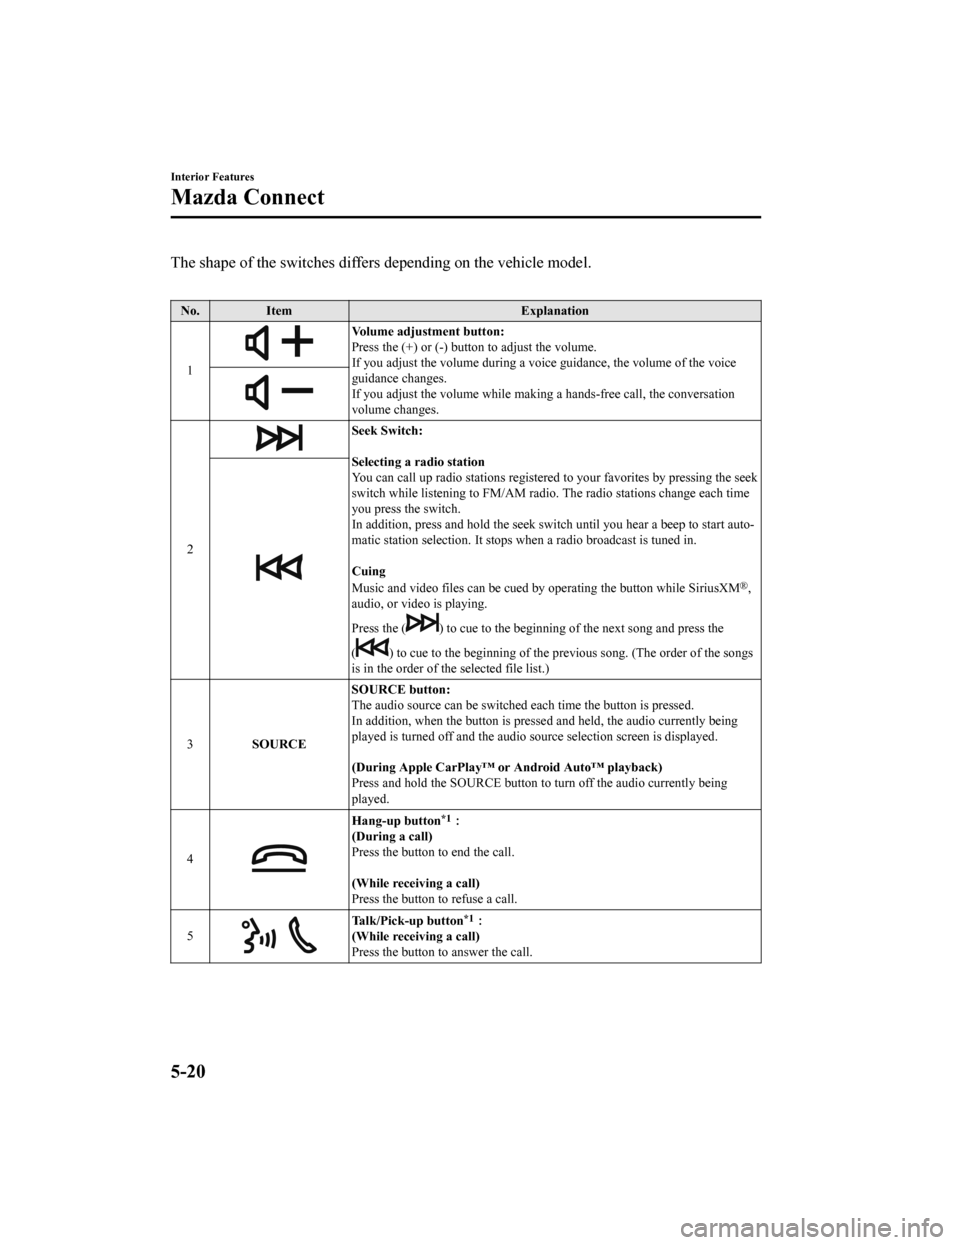 MAZDA MODEL 3 HATCHBACK 2020  Owners Manual (in English) The shape of the switches differs depending on the vehicle model.
 
No. Item Explanation
1
Volume adjustment button:
Press the (+) or (-) butto n to adjust the volume.
If you adjust the volume during 